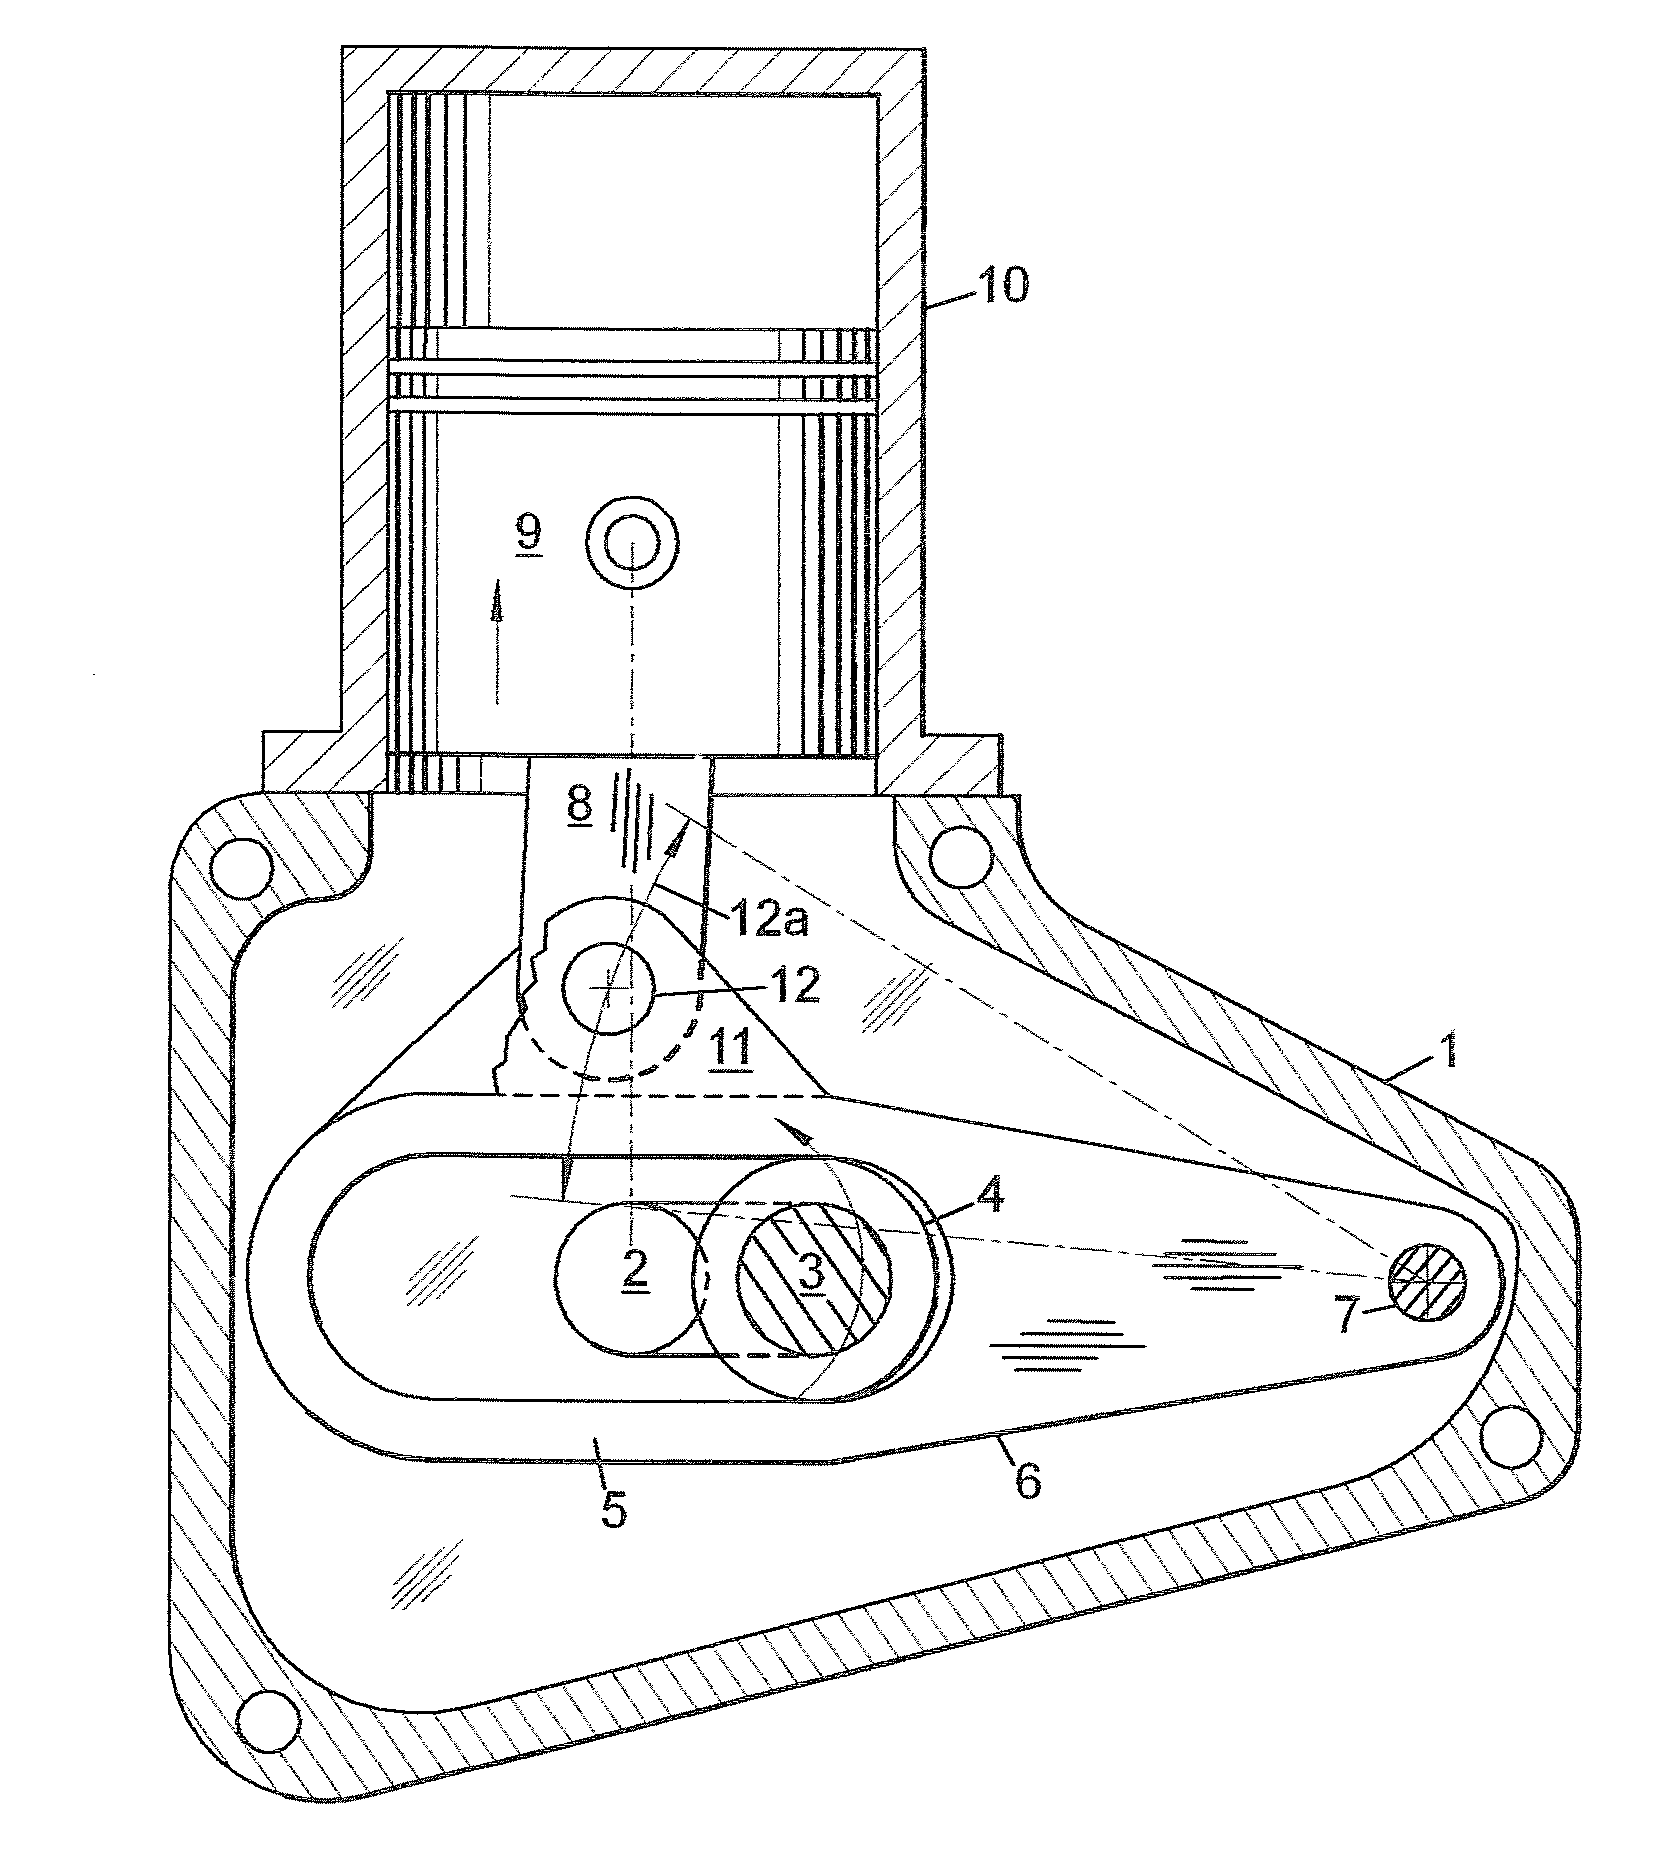 Self-Aspirated Reciprocating Internal Combustion Engine